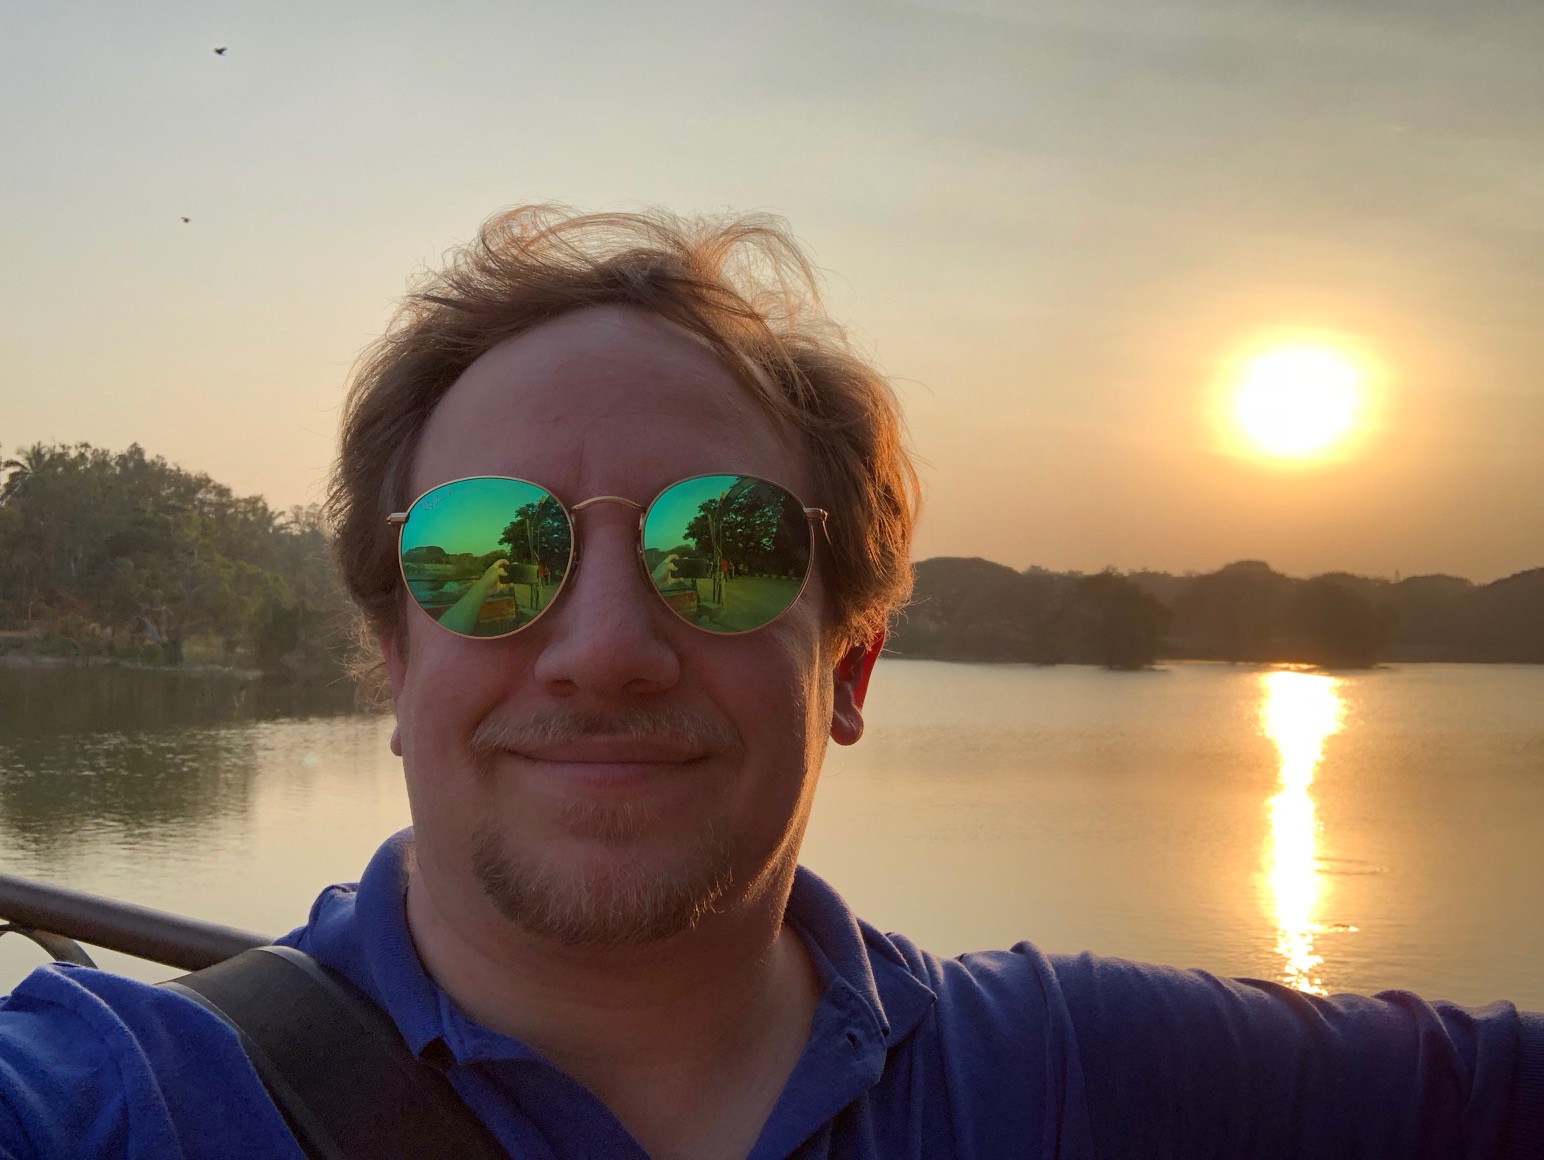 The sun sets over a lake, behind a man with a goatee, messy blond hair, and preposterous sunglasses.